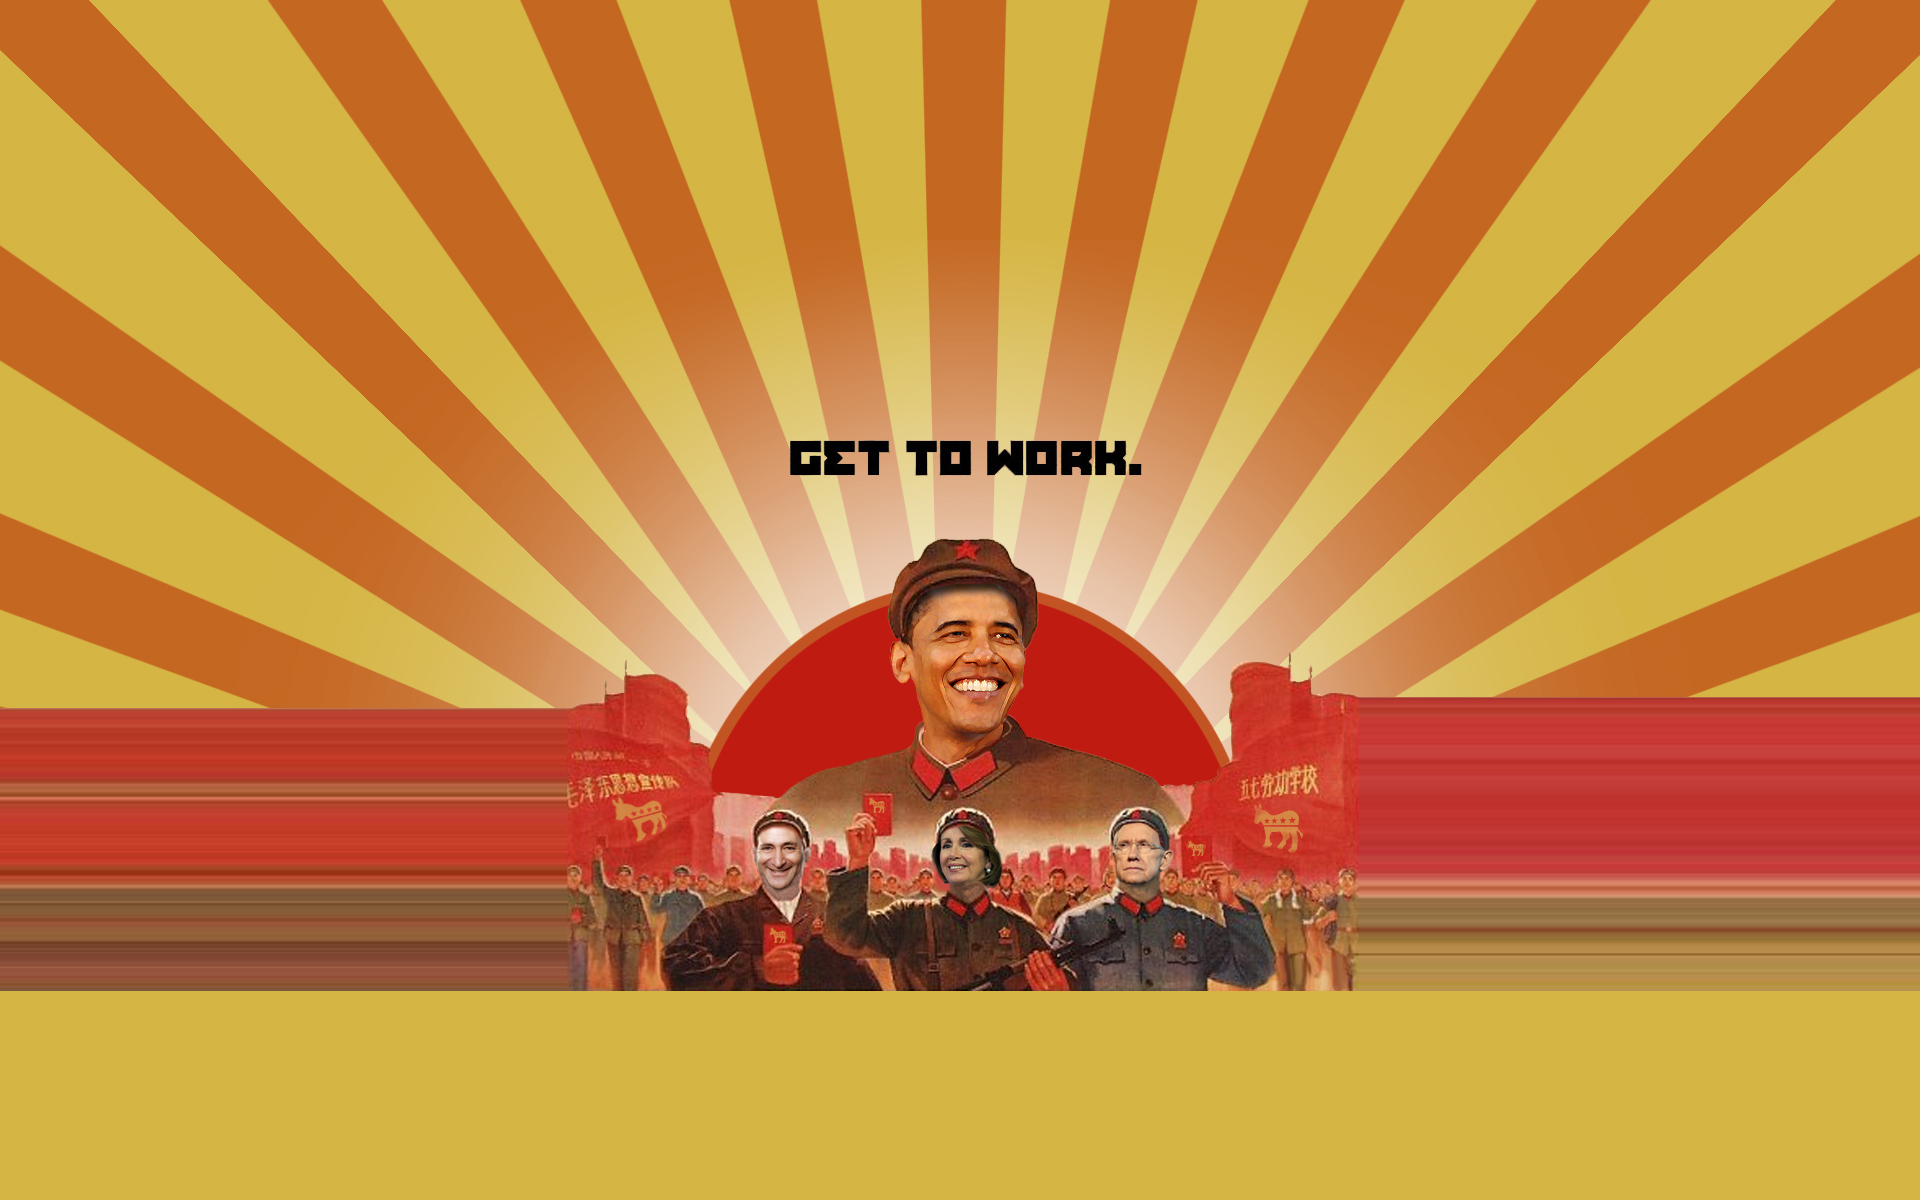 Previous, Funny wallpapers - We build communism with Obama wallpaper